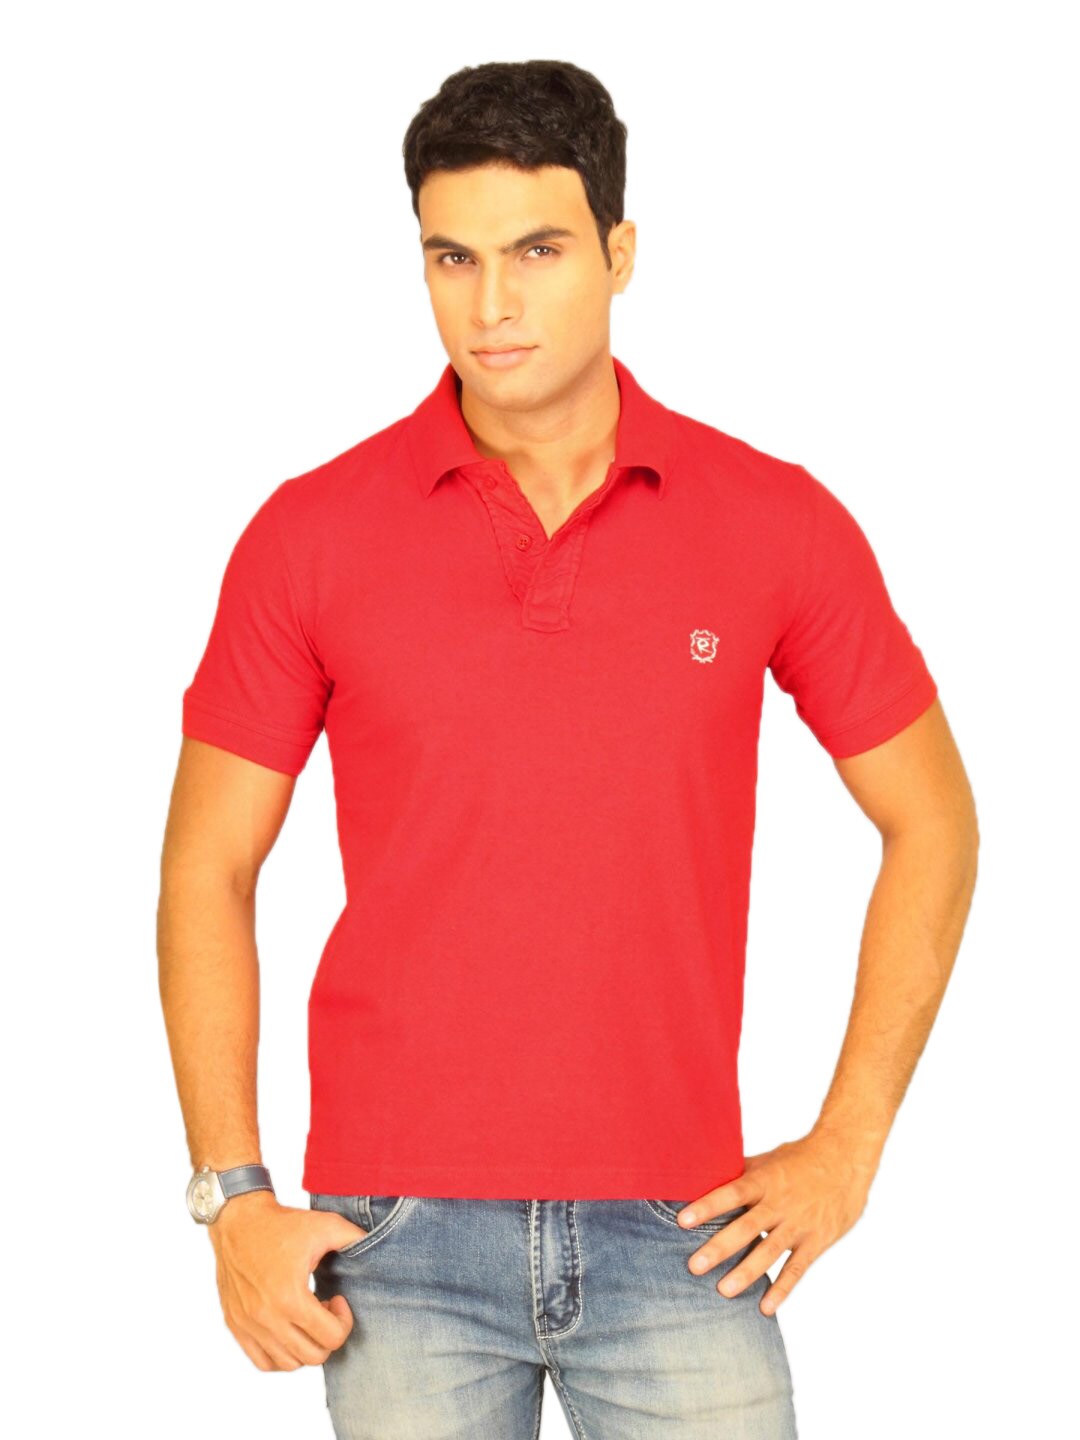 Classic Polo Men's Red T-shirt